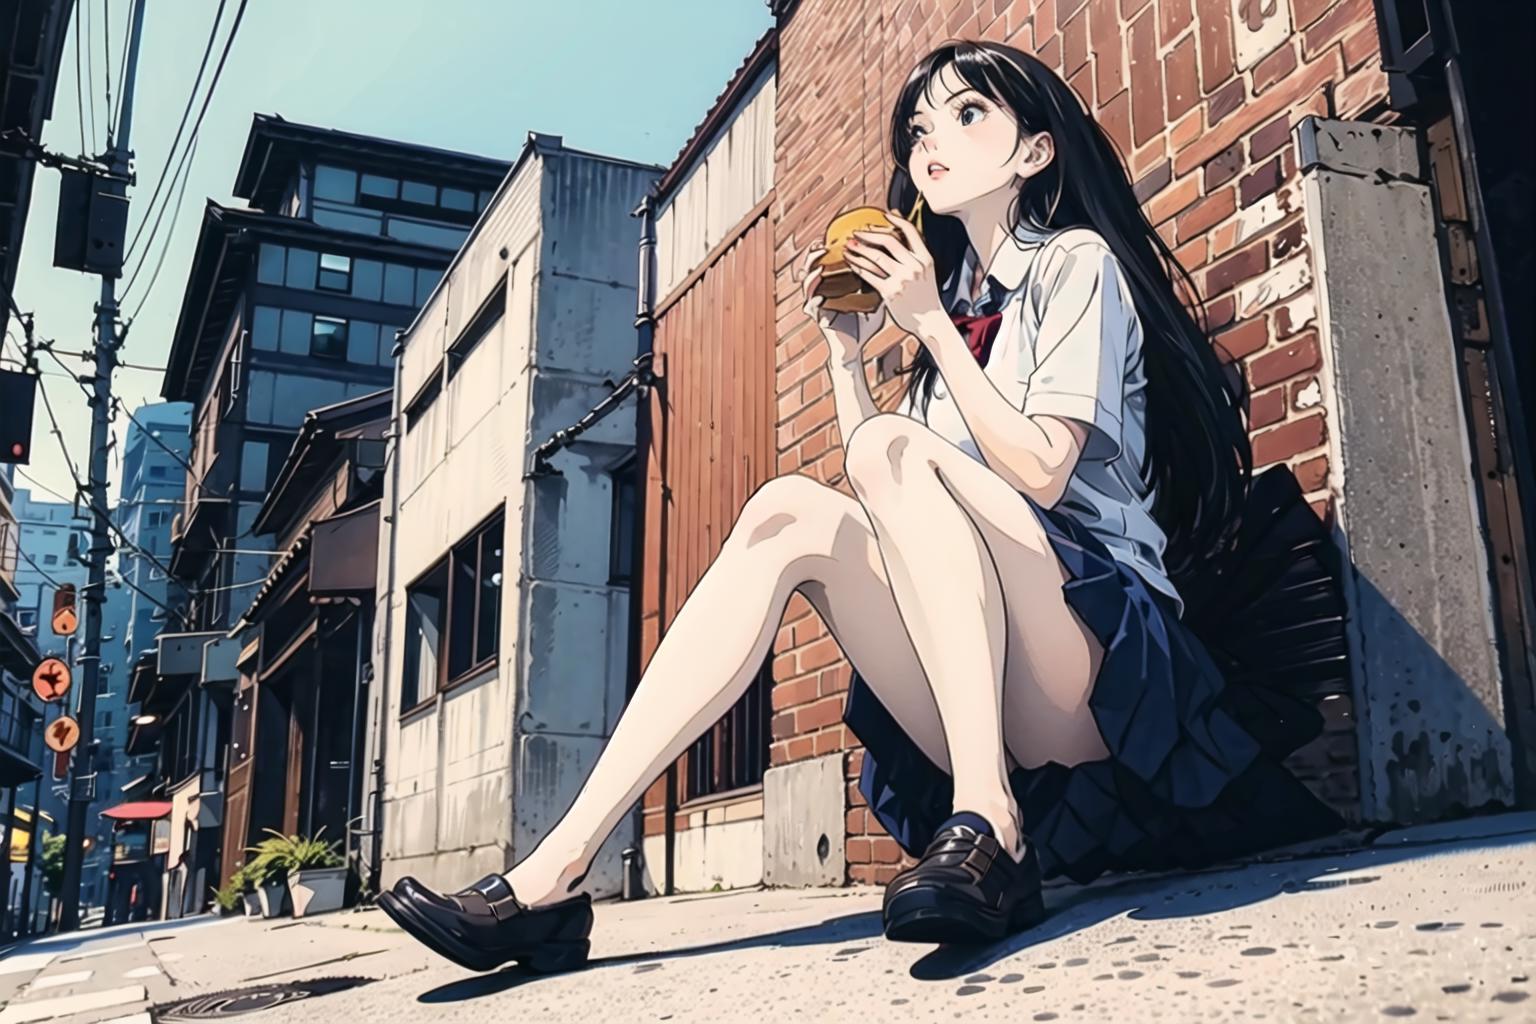 A young woman in a school uniform eating a sandwich in front of a brick building.